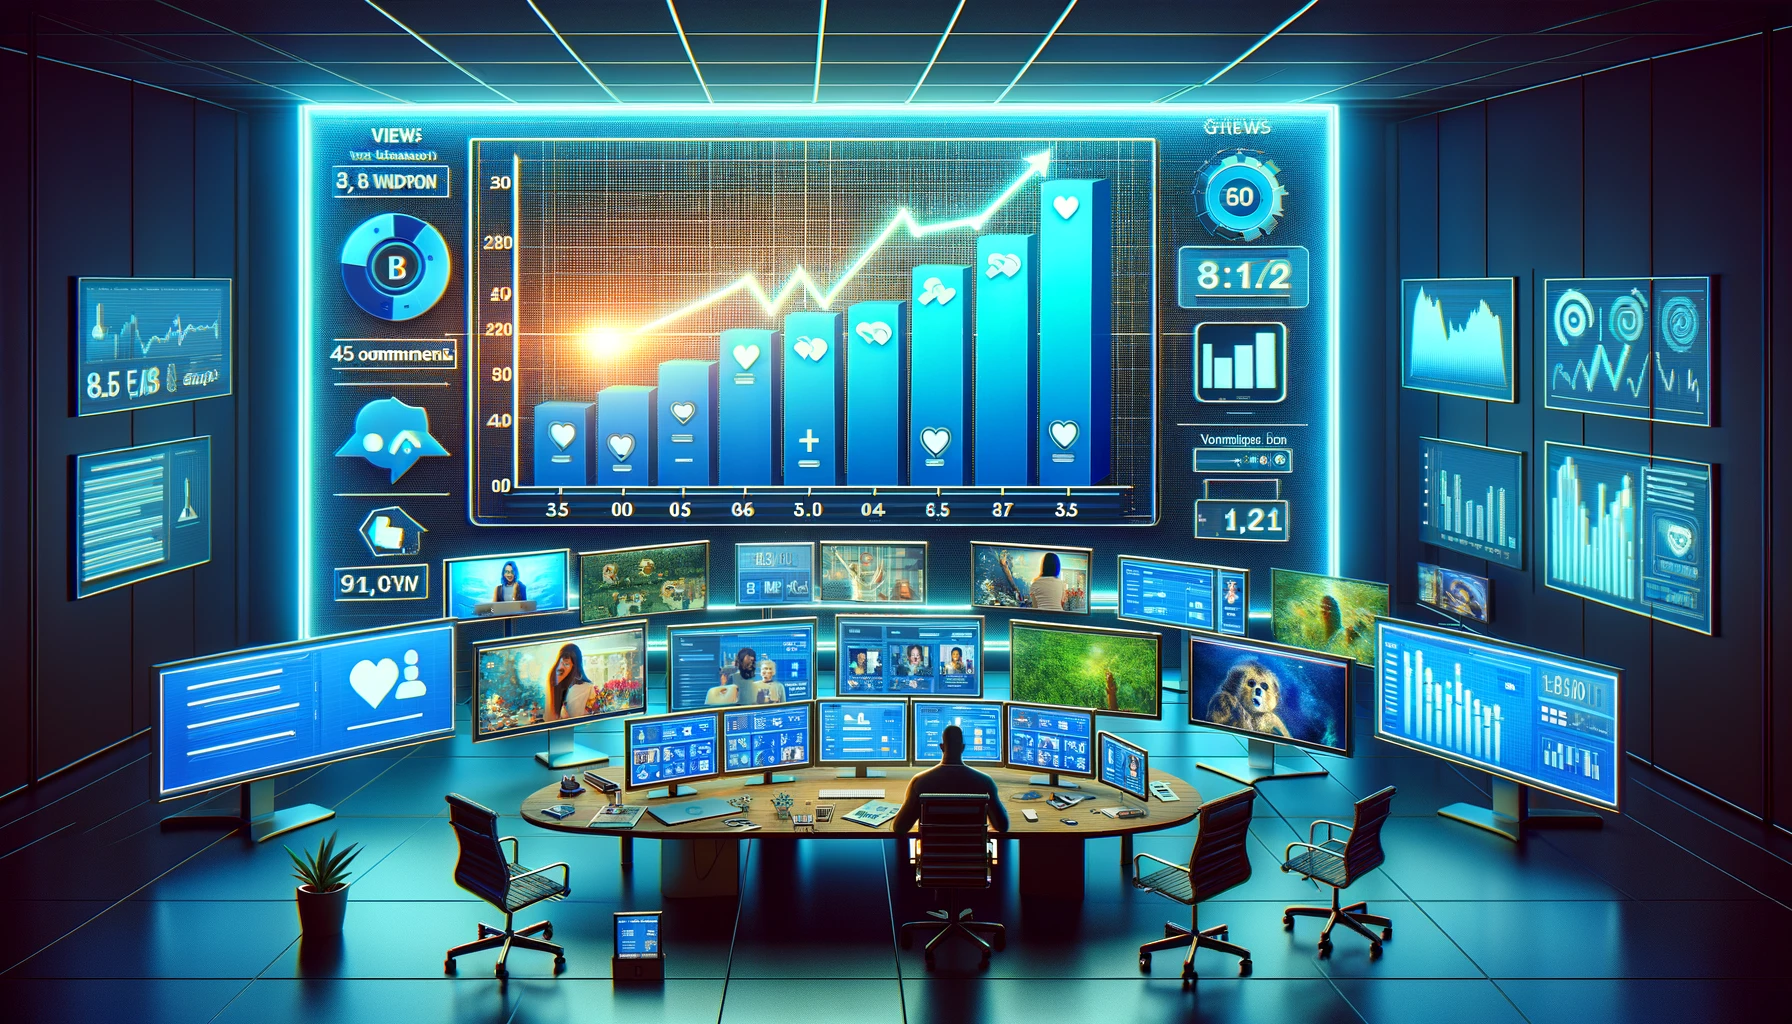 Image visualizing 'Video Engagement Metrics', with a large screen displaying a graph of rising metrics surrounded by smaller screens showing engaging video content types, set in a control room-like environment for strategic analysis.